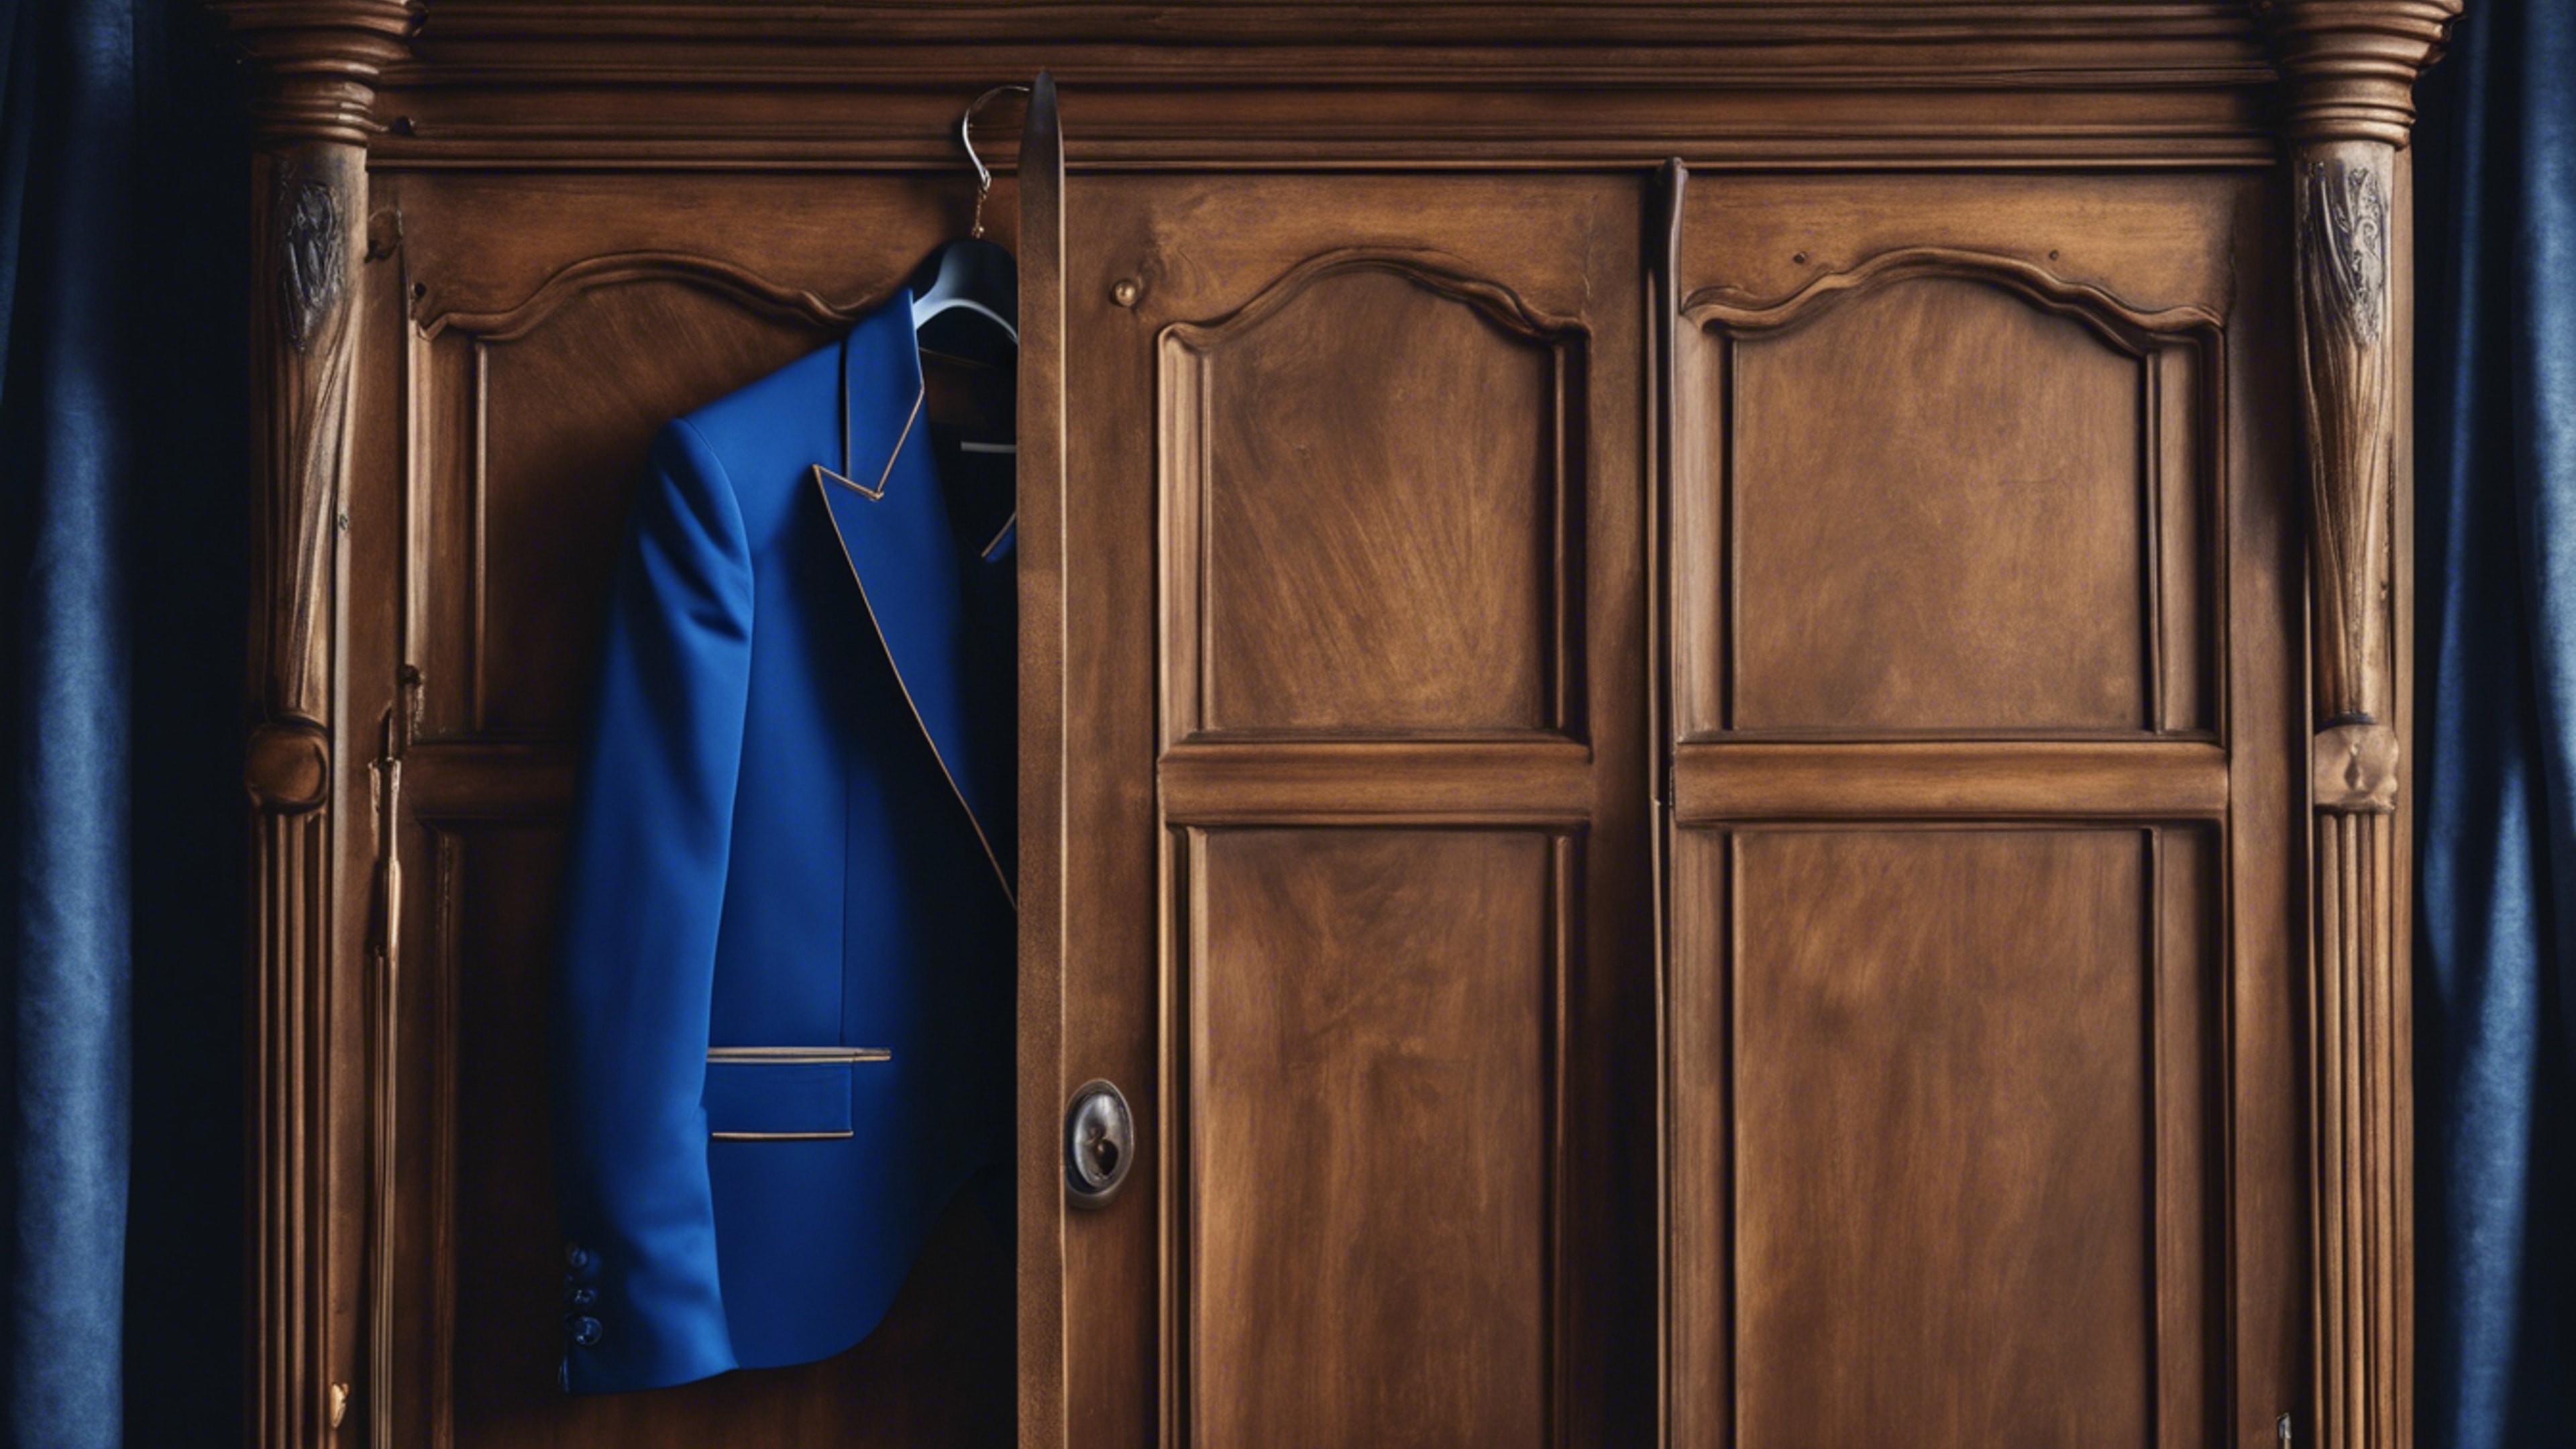 A vintage royal blue tuxedo hanging in a classic antique wardrobe. 벽지[1e18aa866c984257b969]